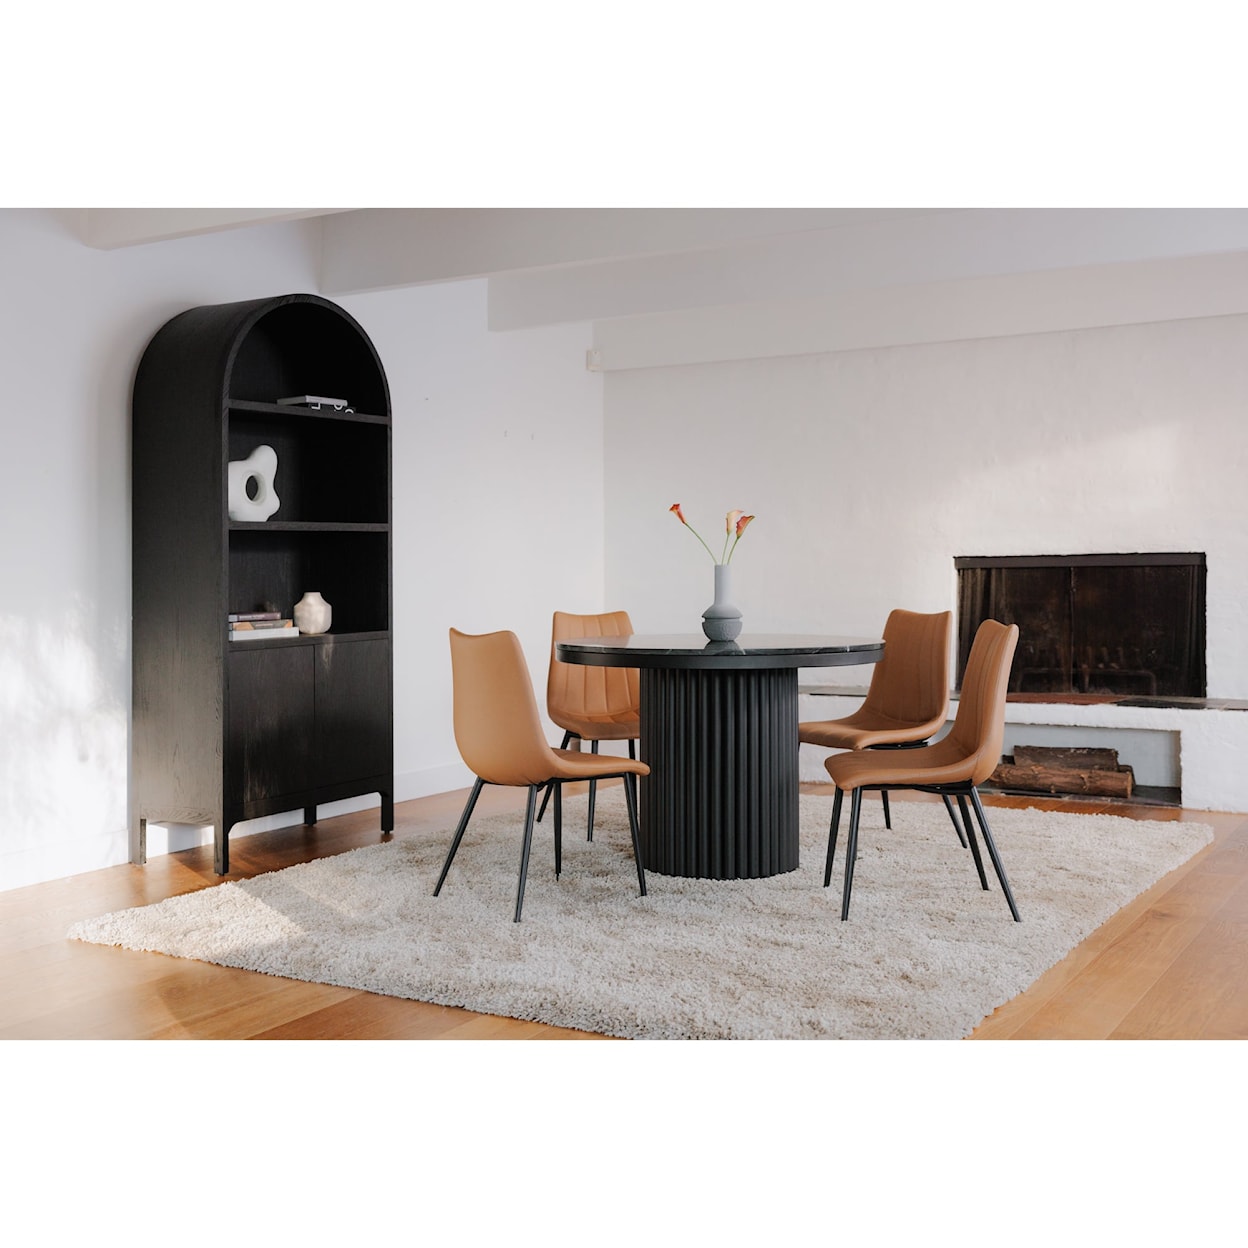 Moe's Home Collection Alibi Dining Chair